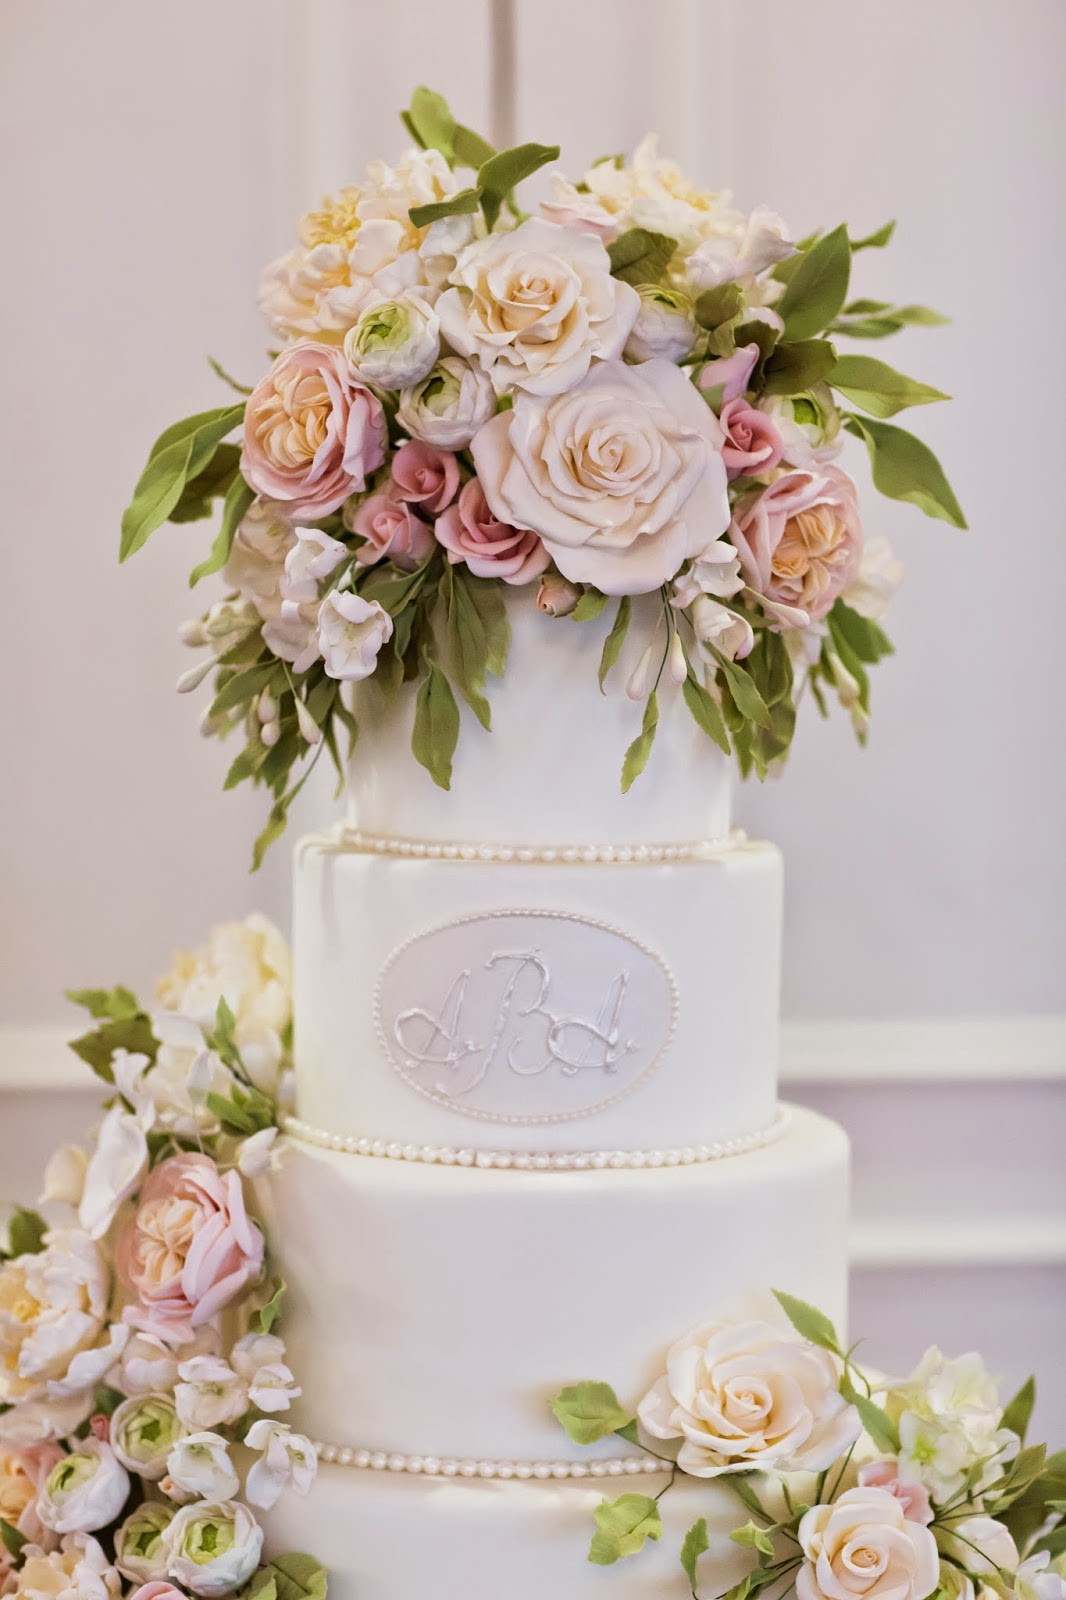 Wedding Cake With Flowers
 For the Love of Cake by Garry & Ana Parzych November 2014